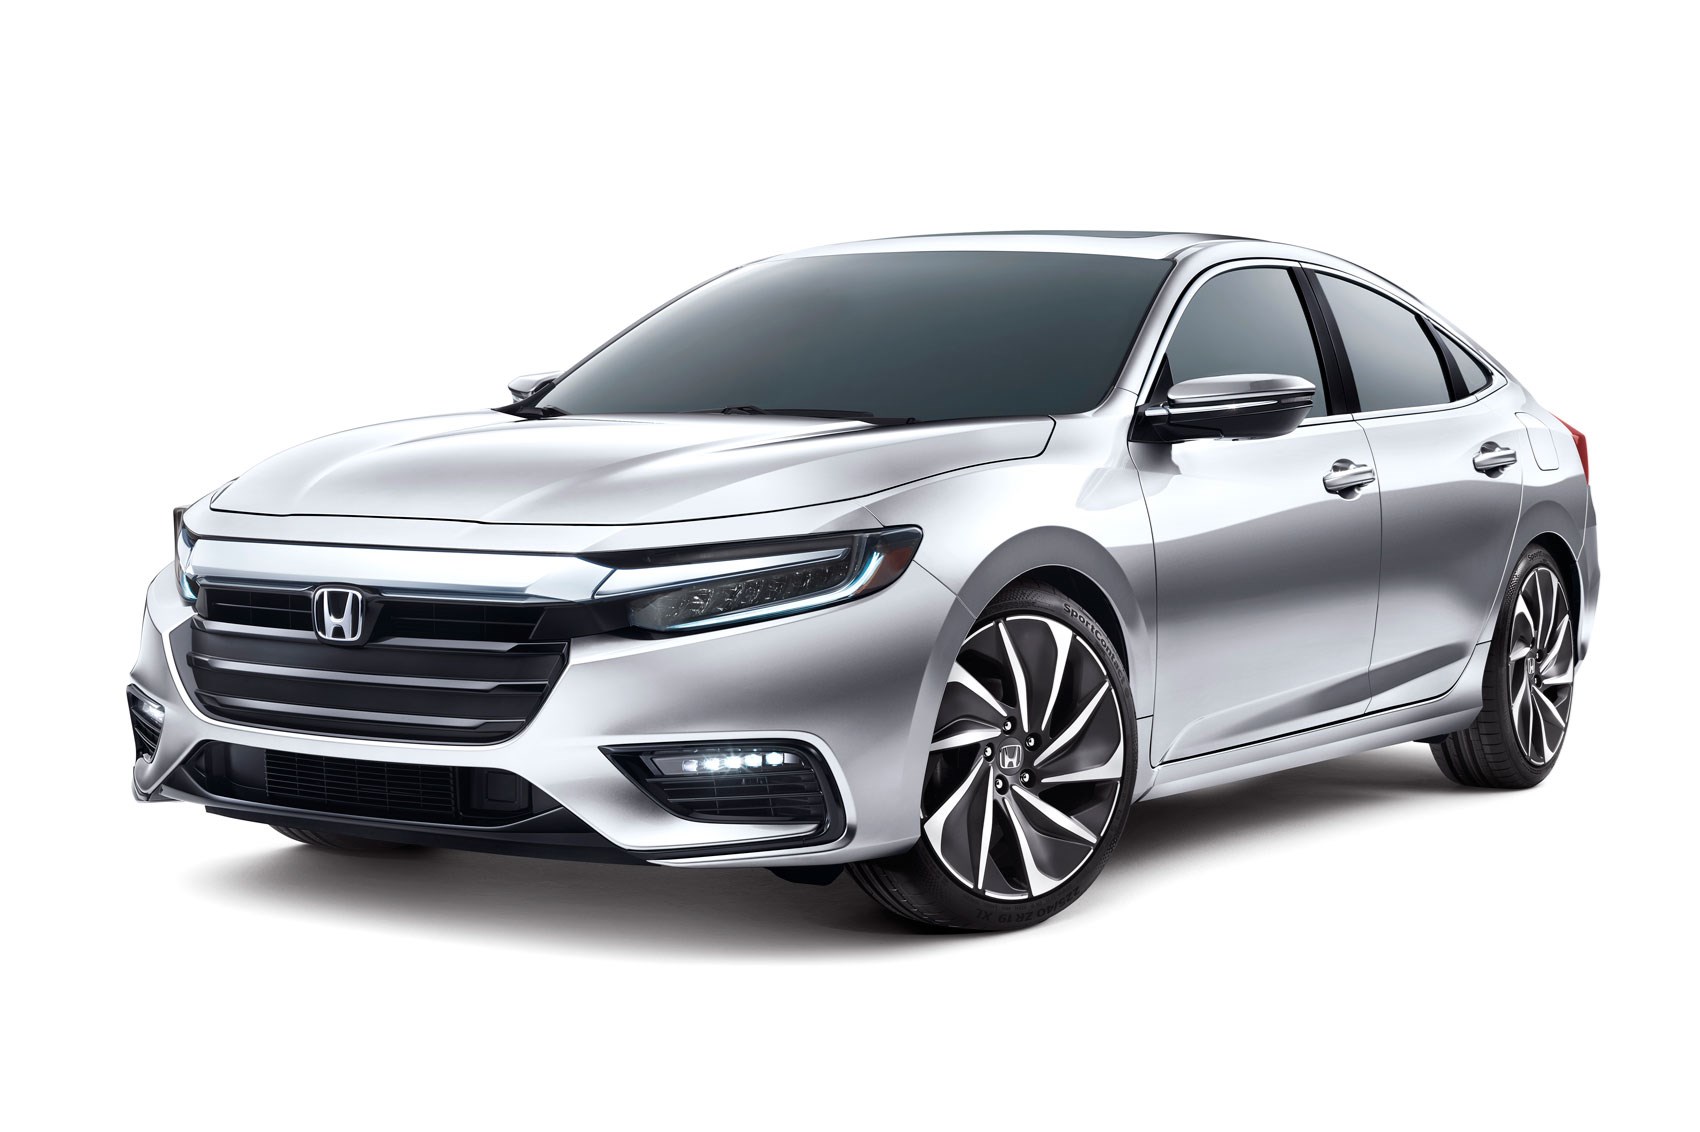 The Popularity of Honda: A Blend of Quality, Reliability, Innovation, and Affordability